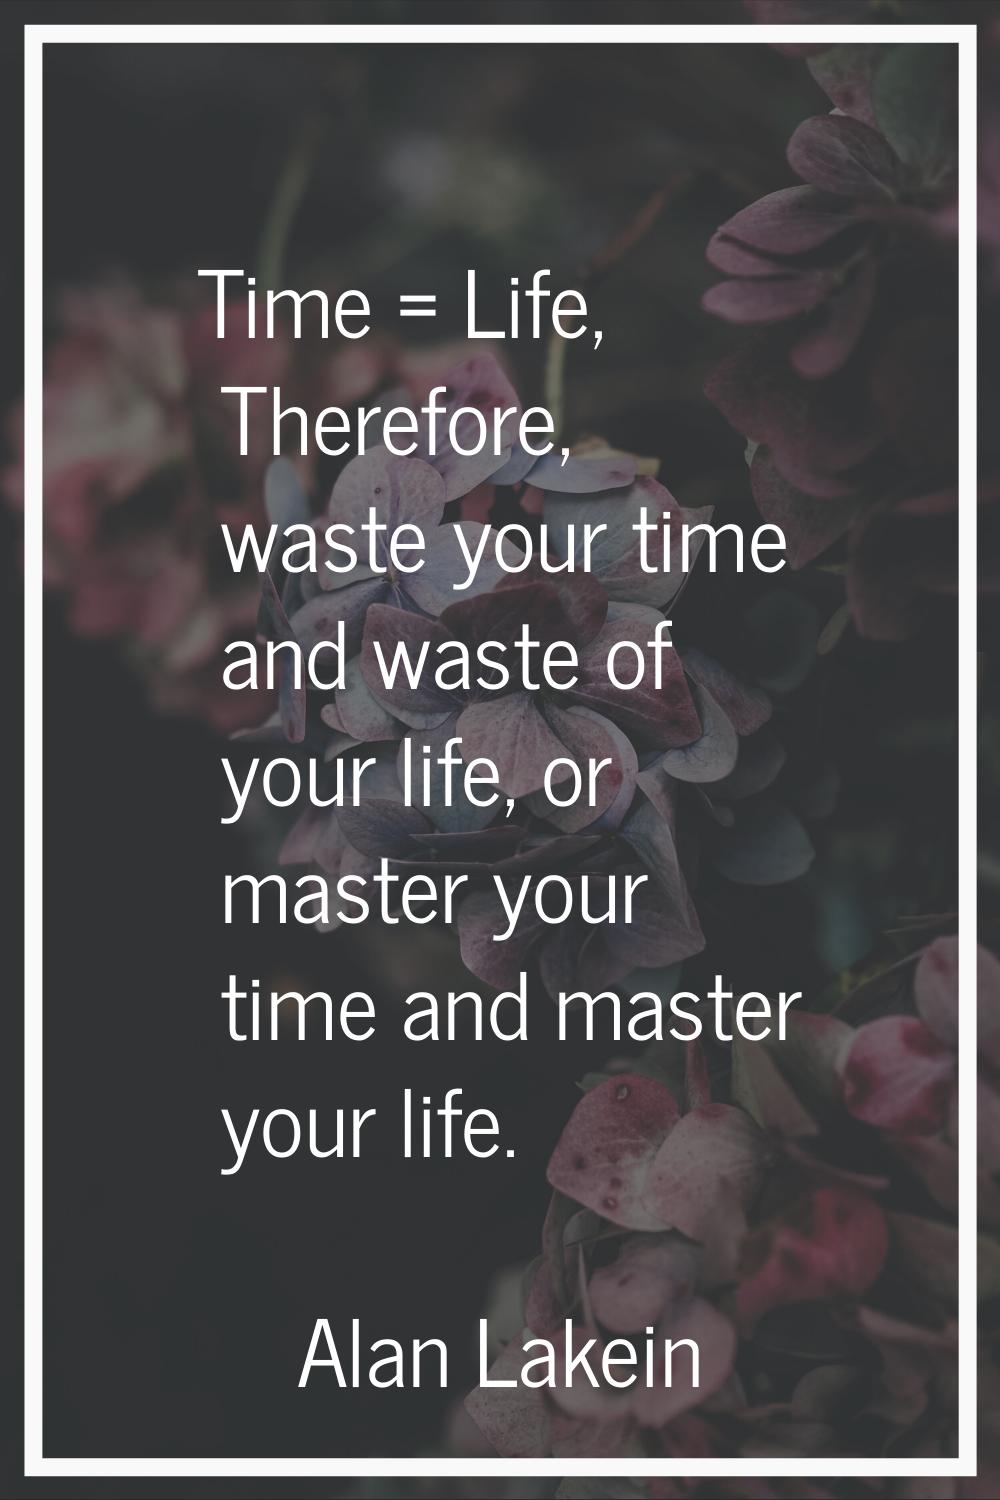 Time = Life, Therefore, waste your time and waste of your life, or master your time and master your